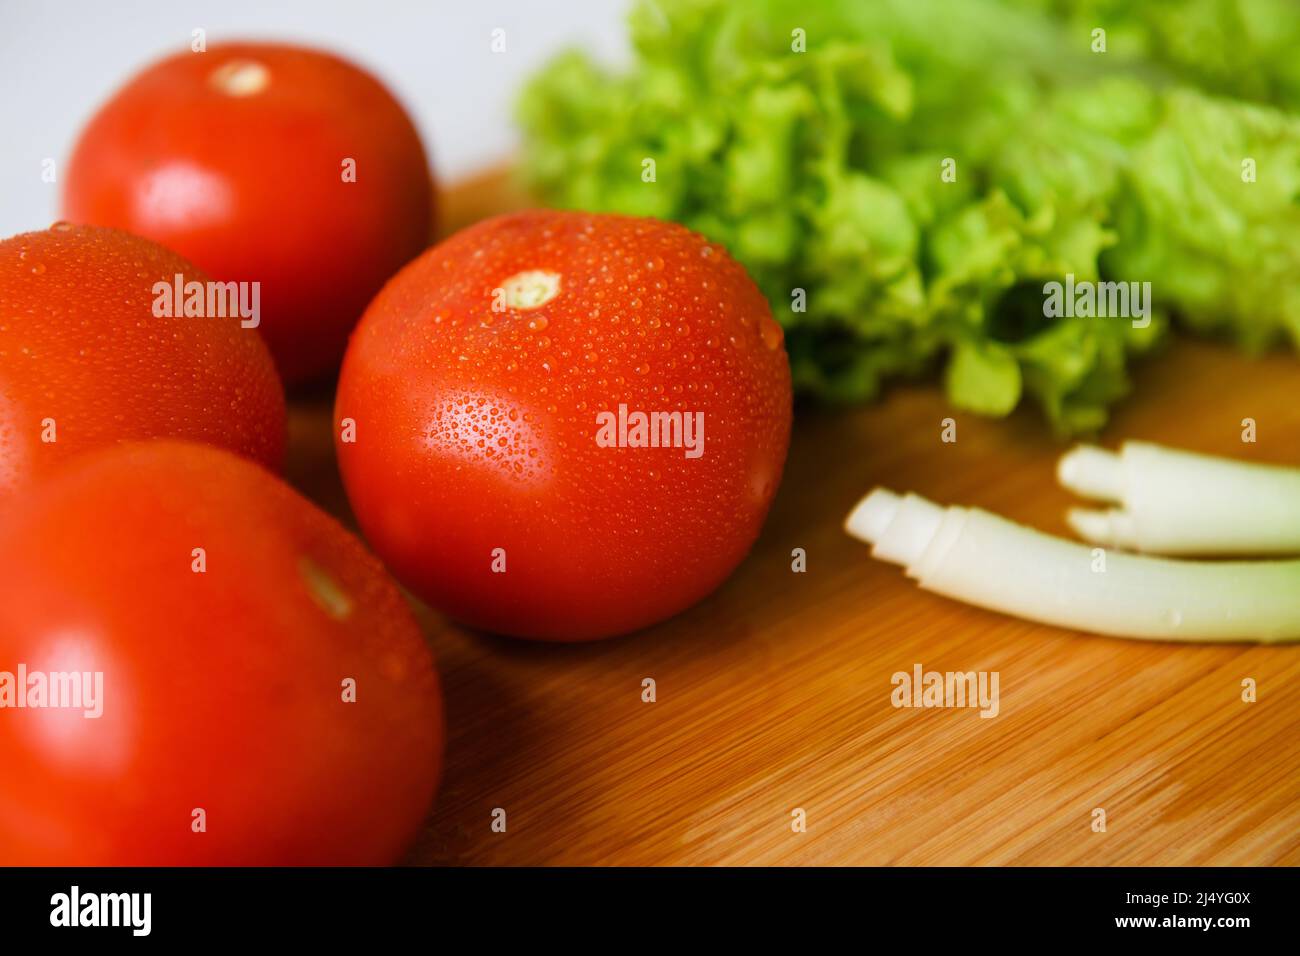 Fresh vegetables for salad lie on a wooden table with a cutting board. Close-up. Stock Photo